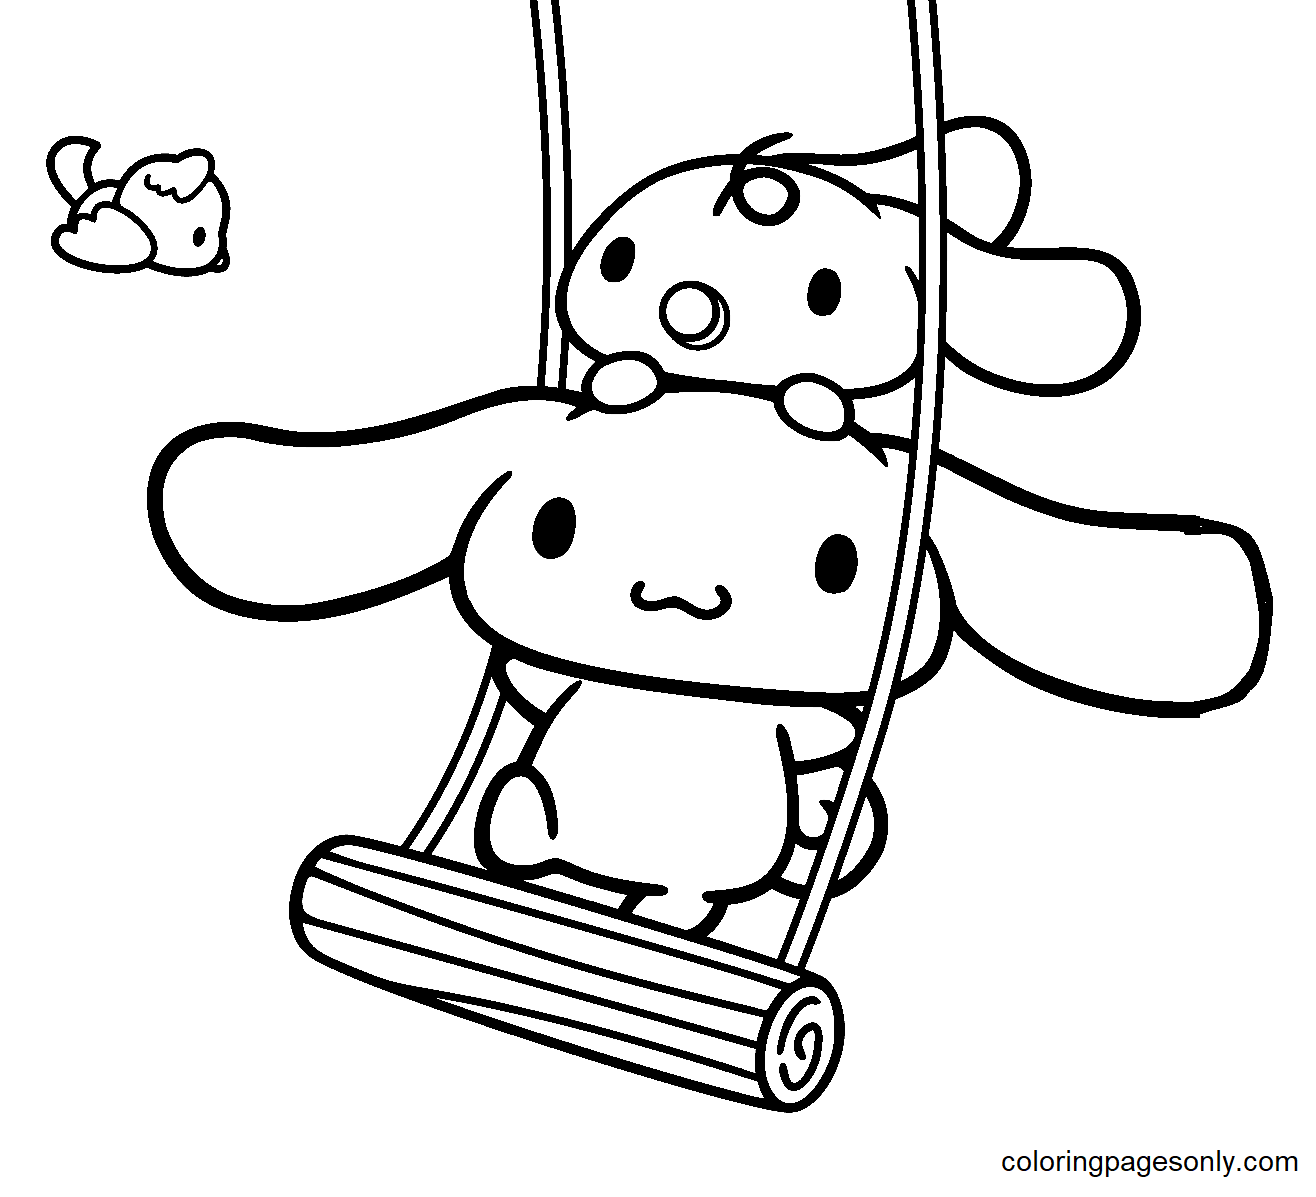 cafe-cinnamoroll-coloring-pages-cinnamoroll-coloring-pages-p-ginas